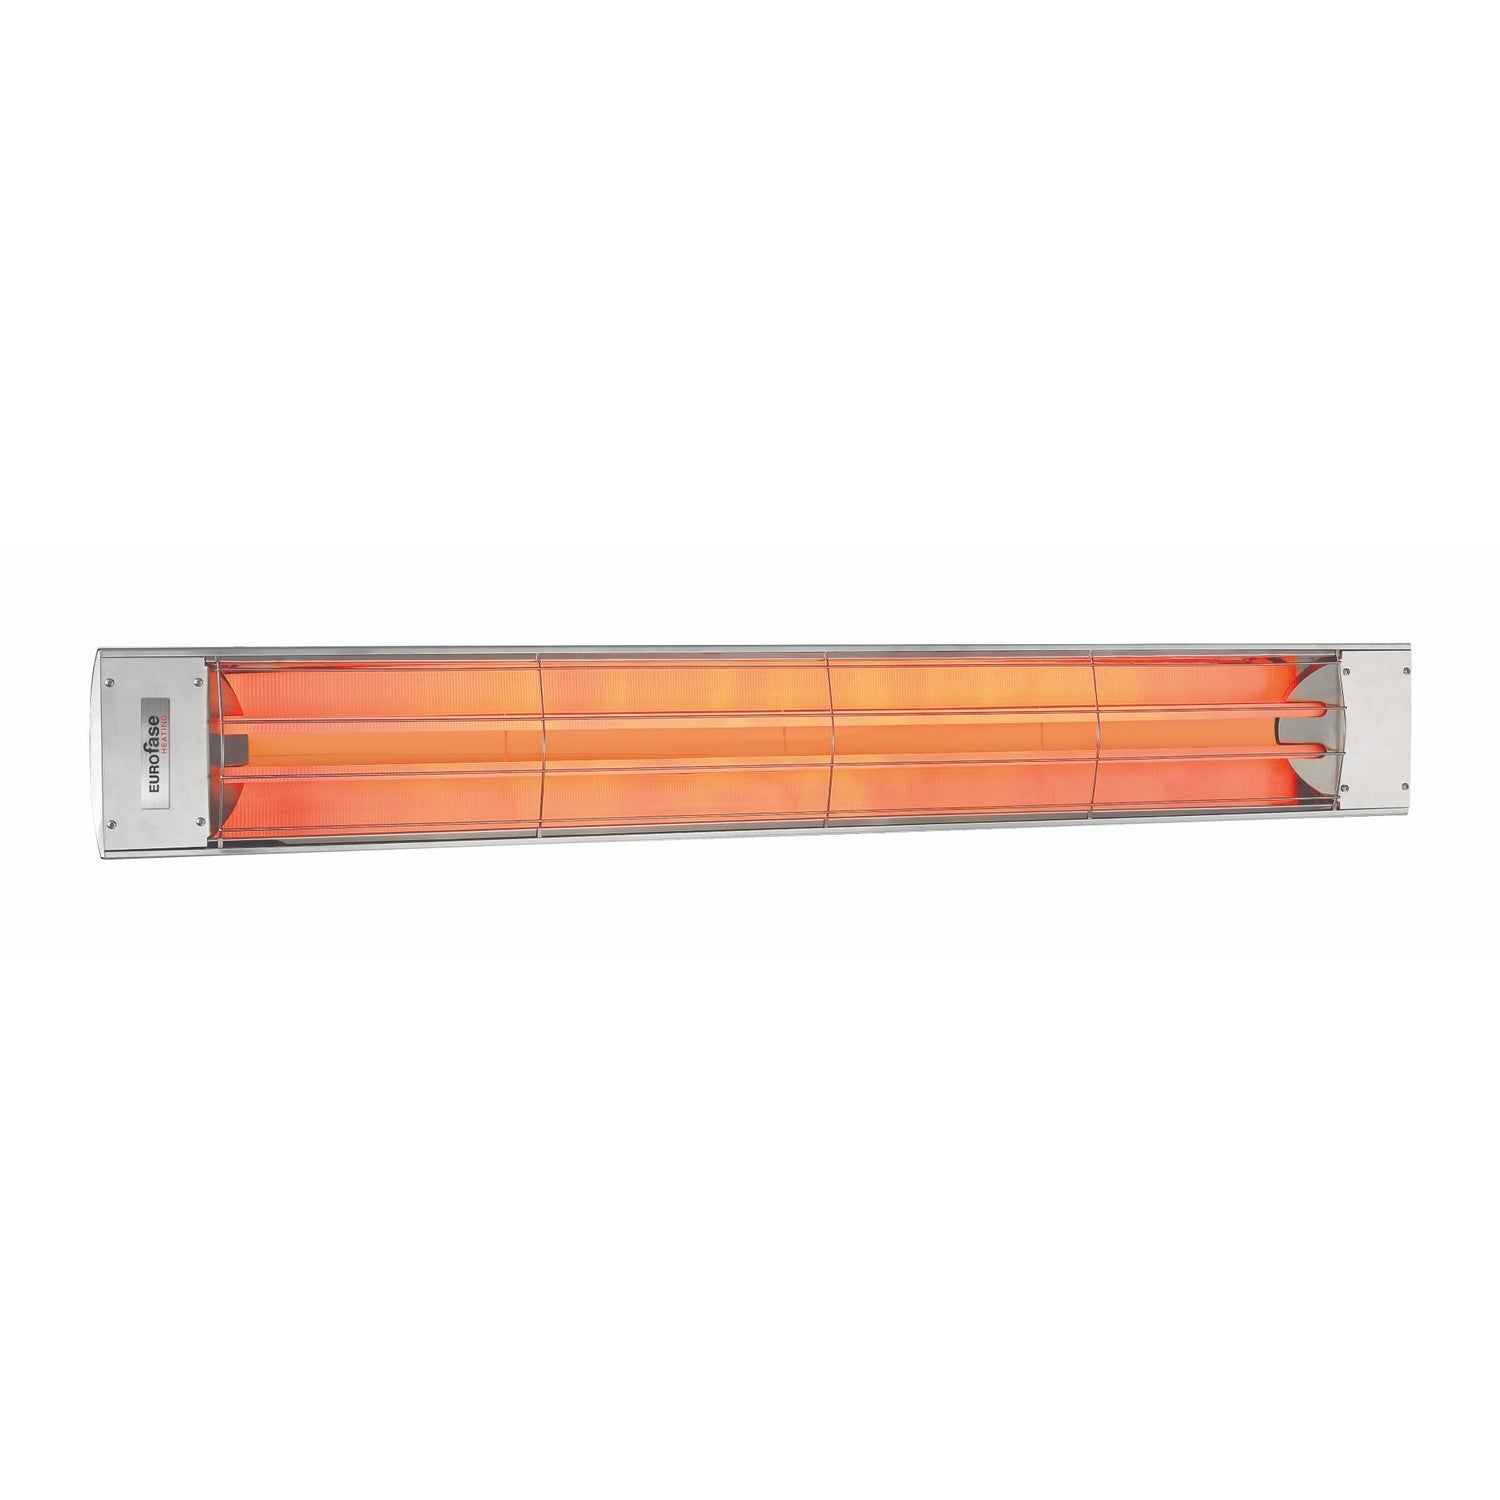 Eurofase - EF60240S - Electric Heater - Stainless Steel